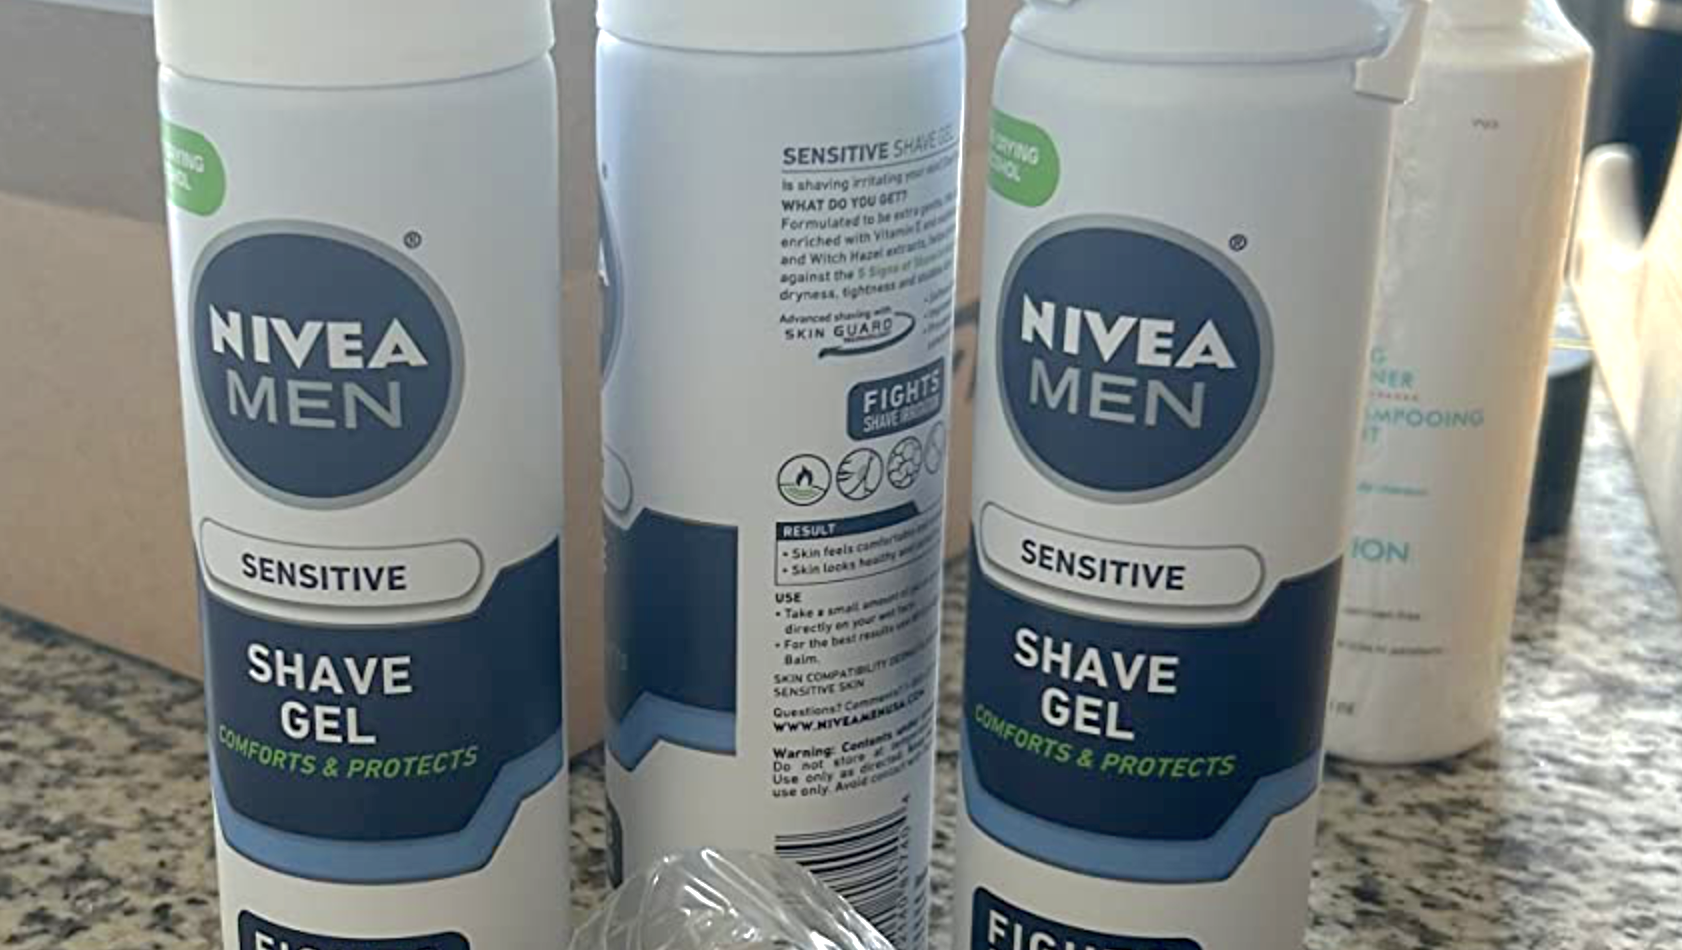 Nivea Men’s Shave Gel 3-Pack Only $6.95 Shipped on Amazon